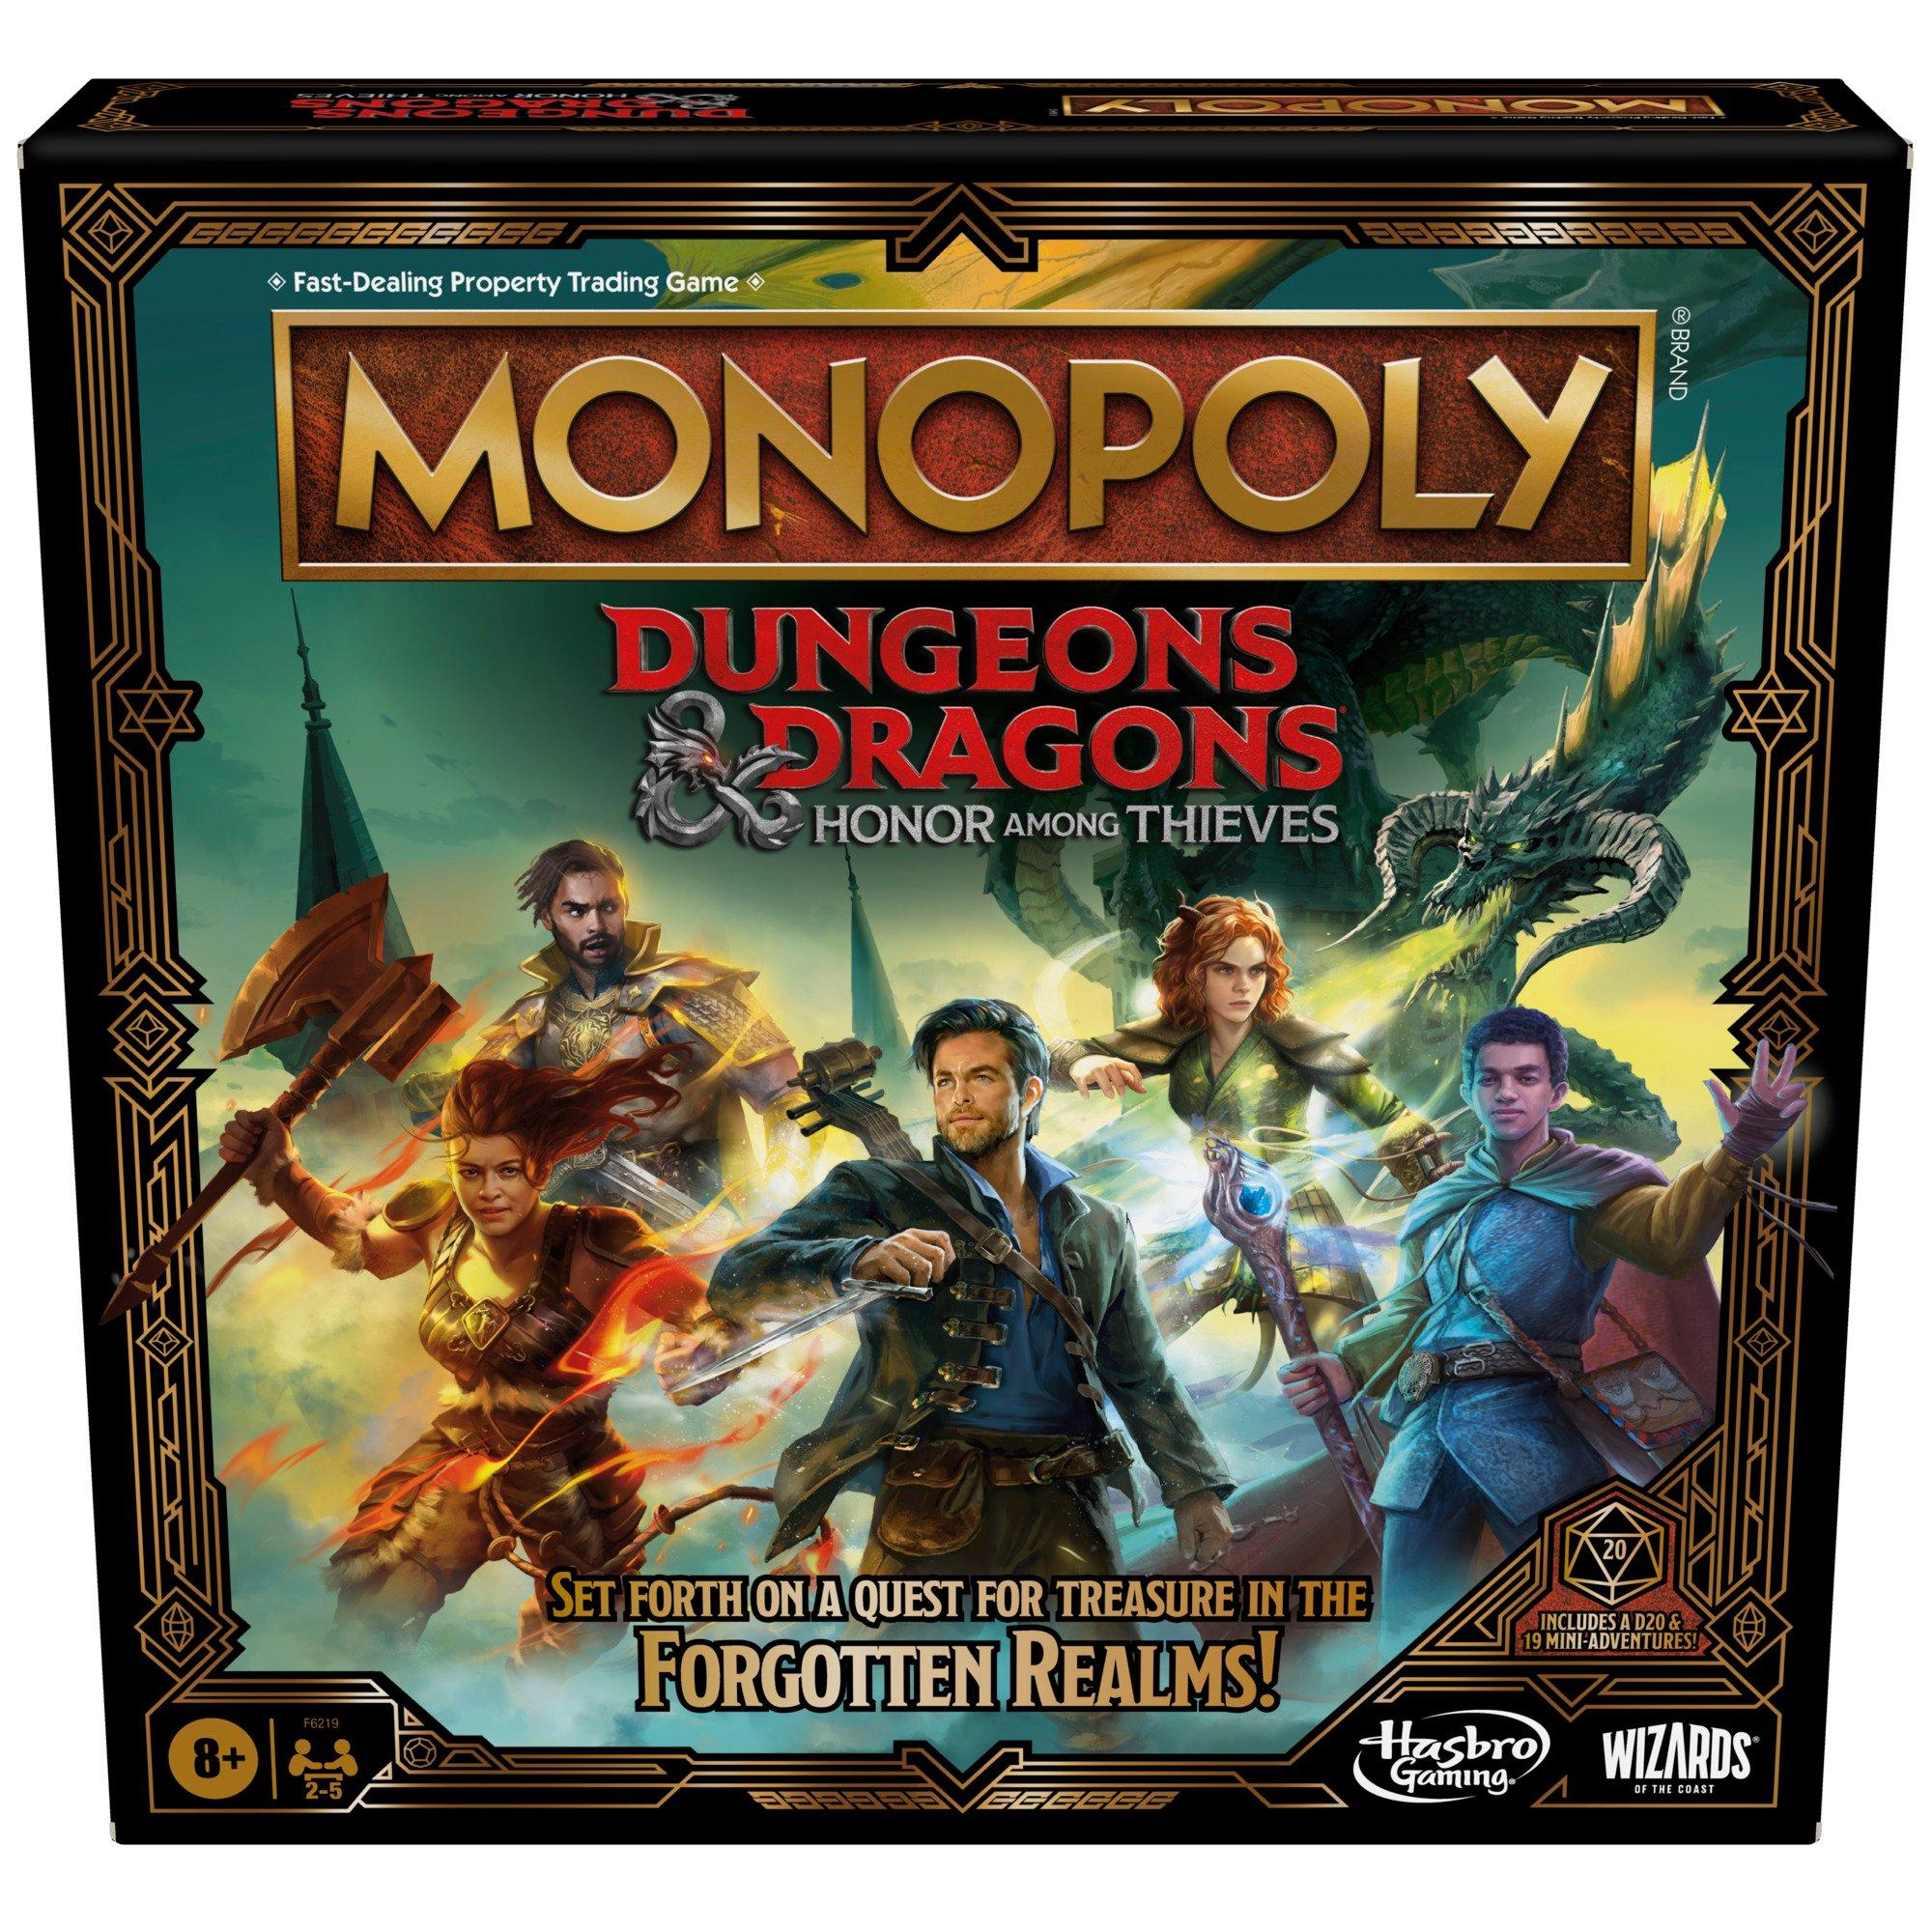 https://media.gamestop.com/i/gamestop/20001970/Monopoly-Dungeons-and-Dragons-Honor-Among-Thieves-Movie-Edition-Board-Game